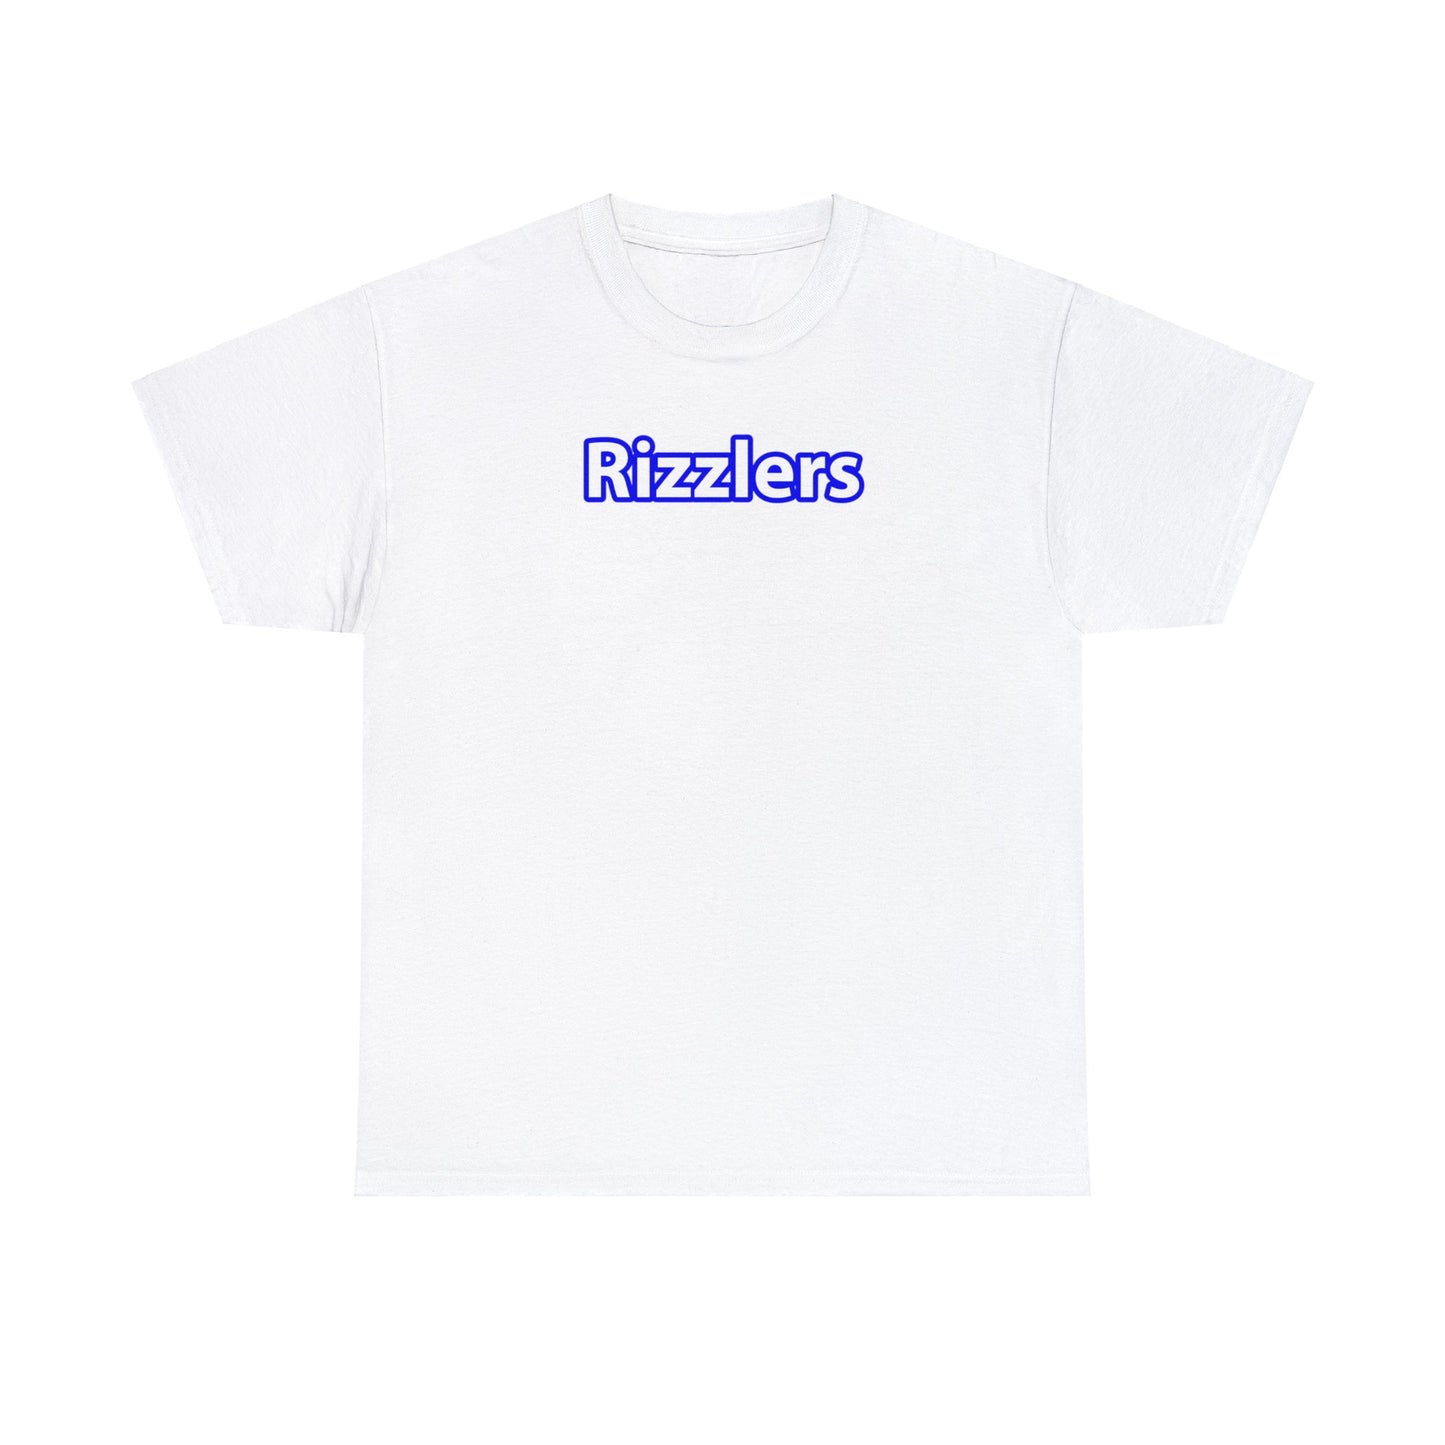 Rizzlers Tee White